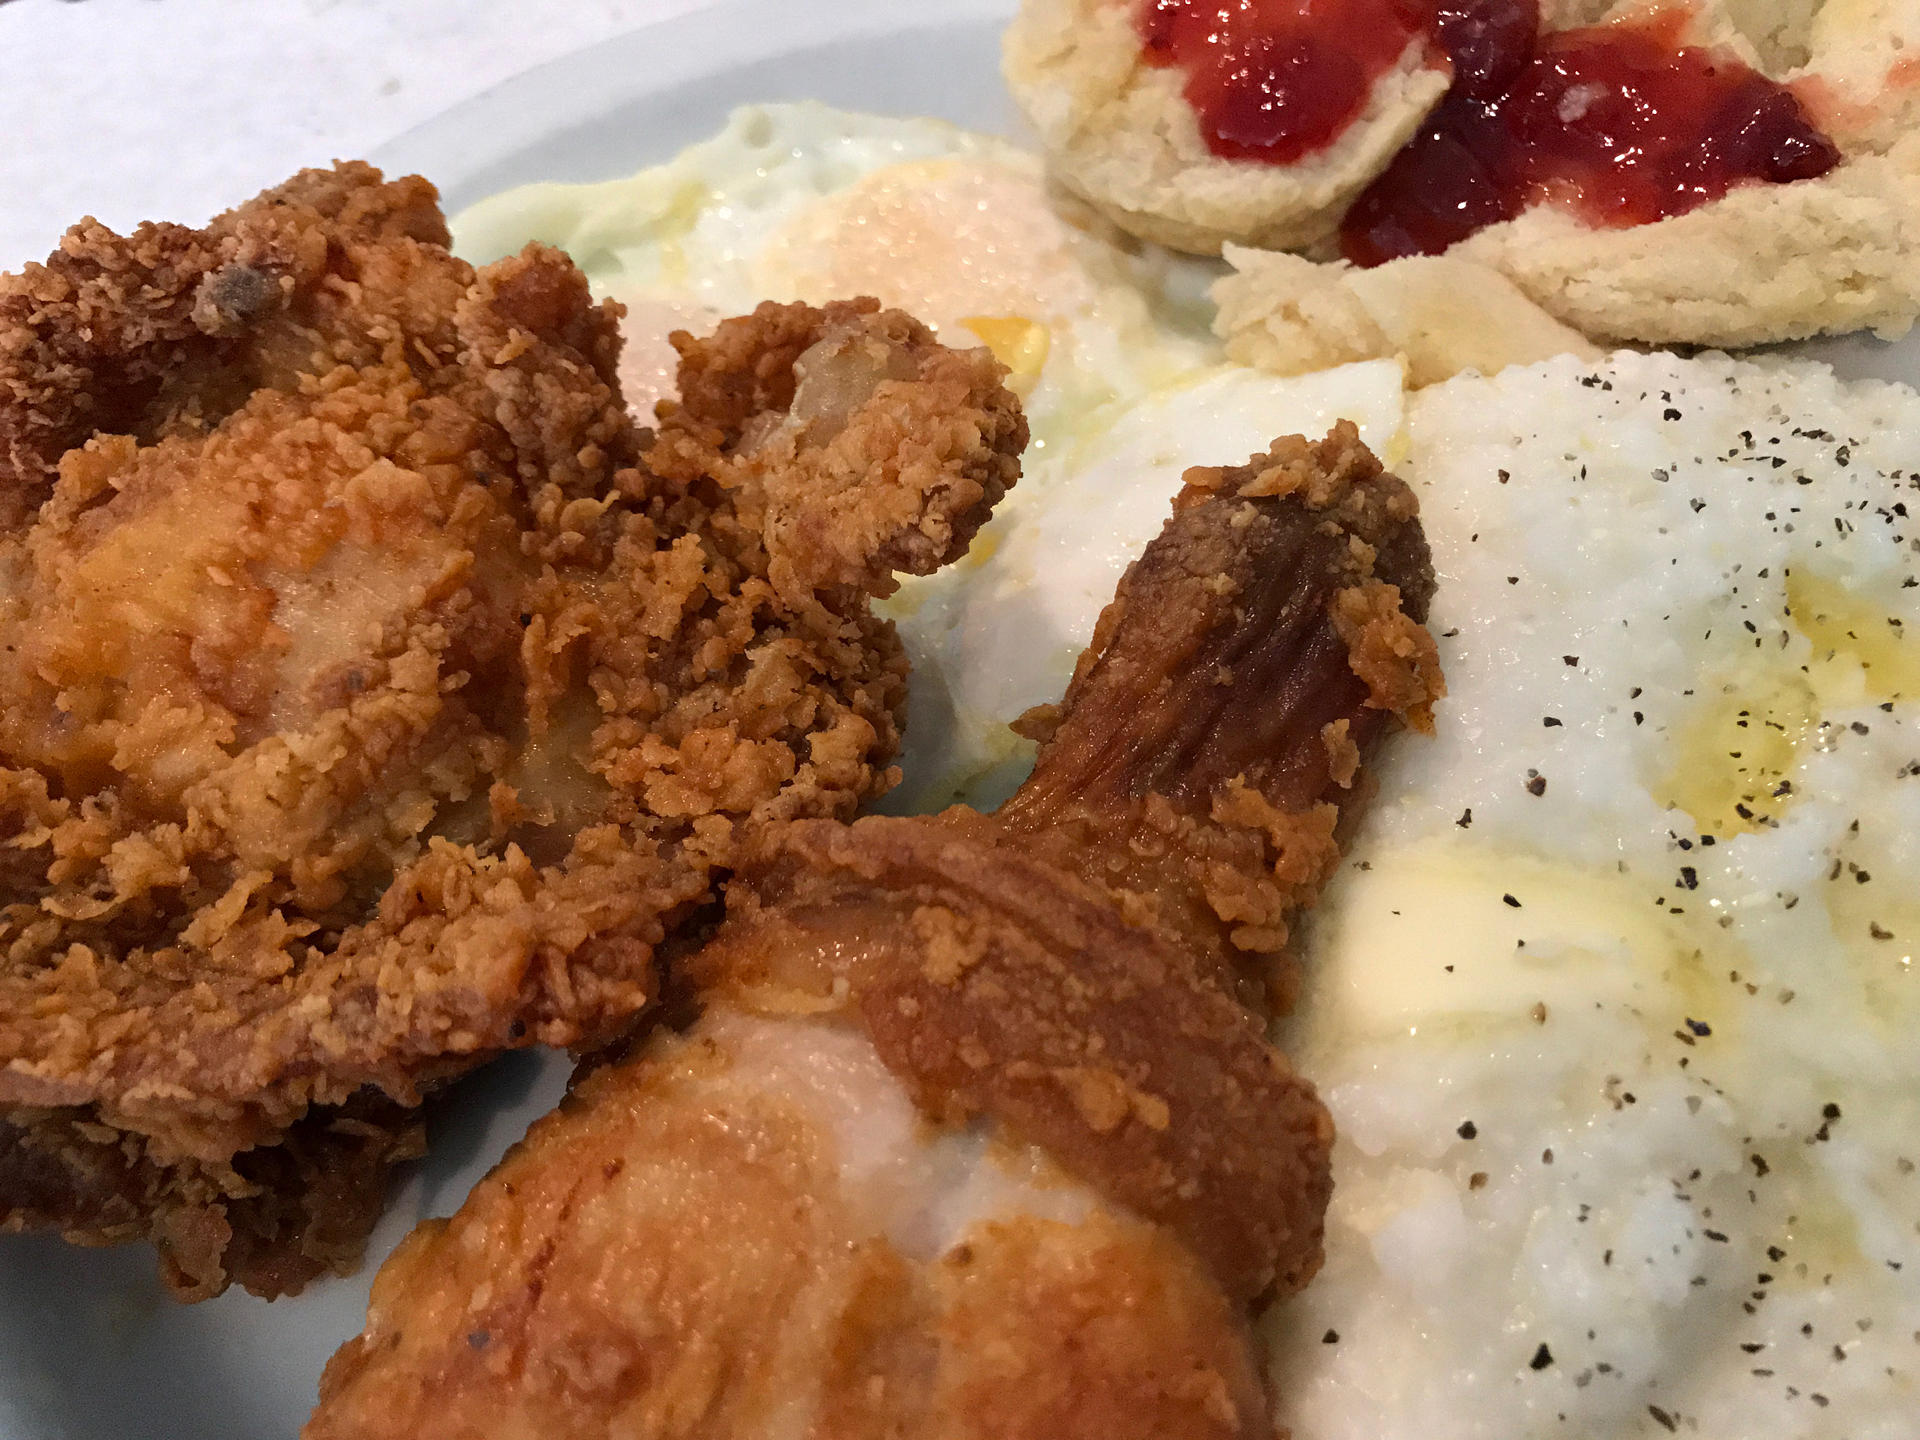 Fried chicken with grits and eggs at Oakland's Lois the Pie Queen.